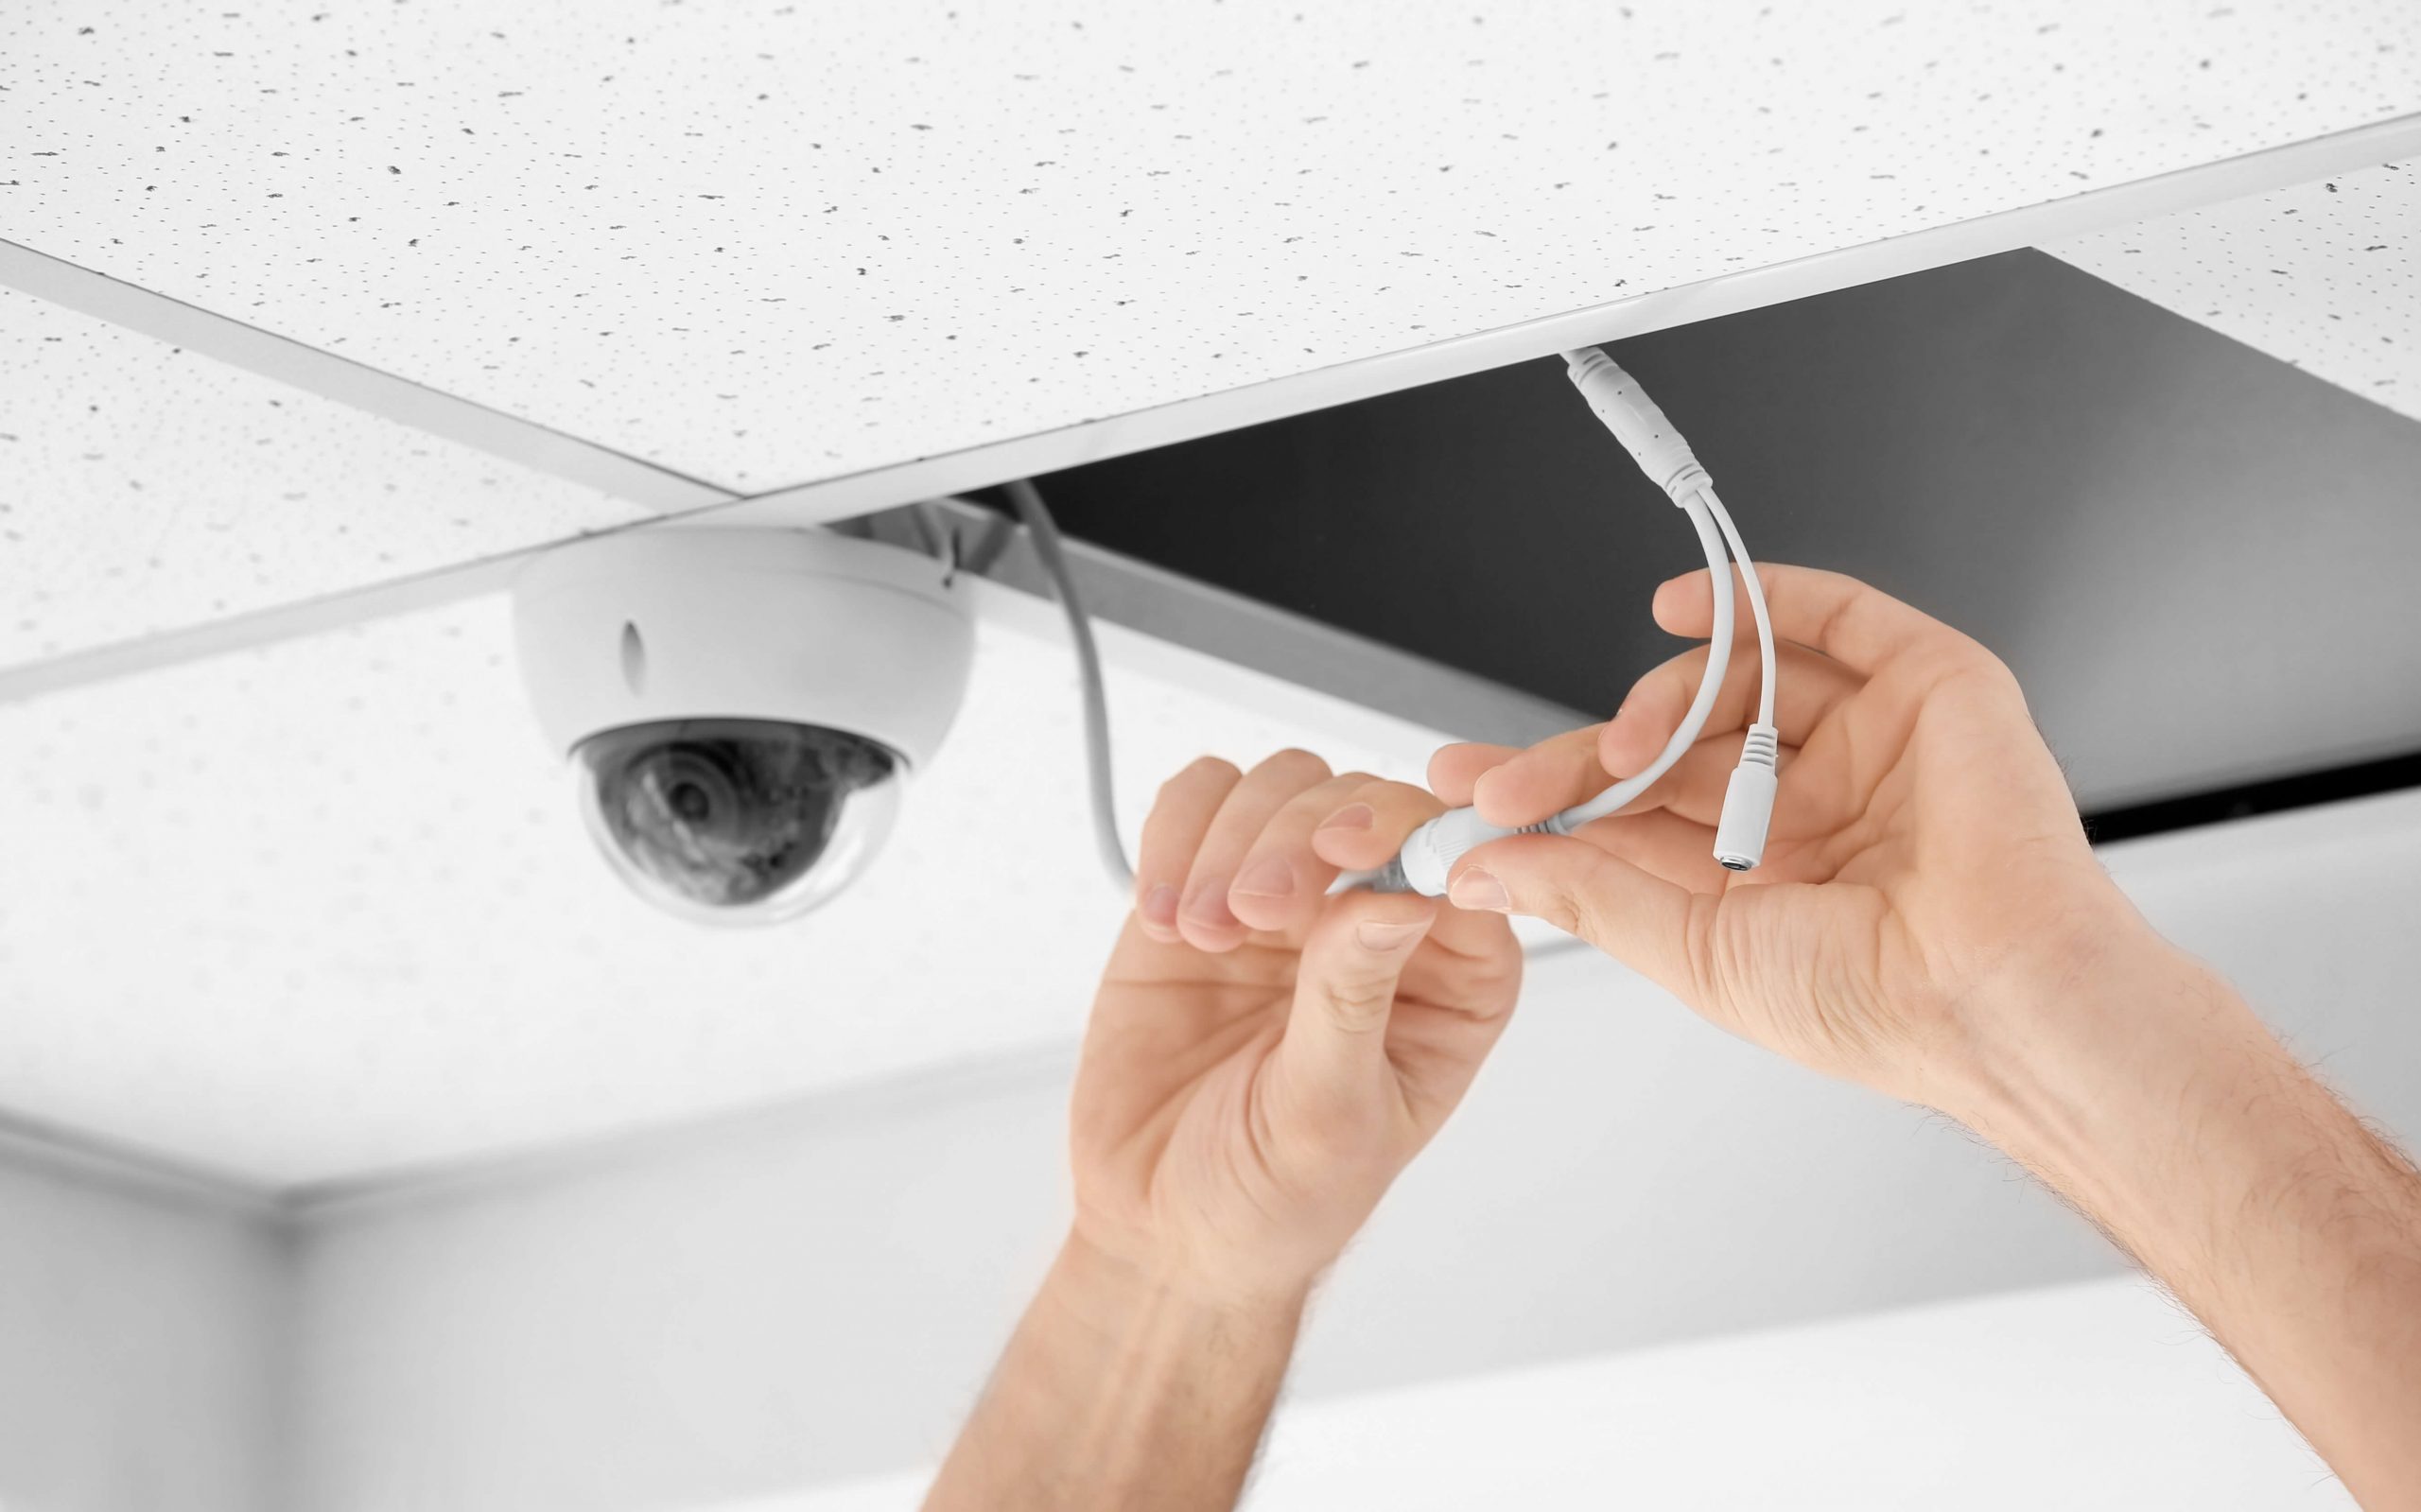 How To Wire In Security Cameras